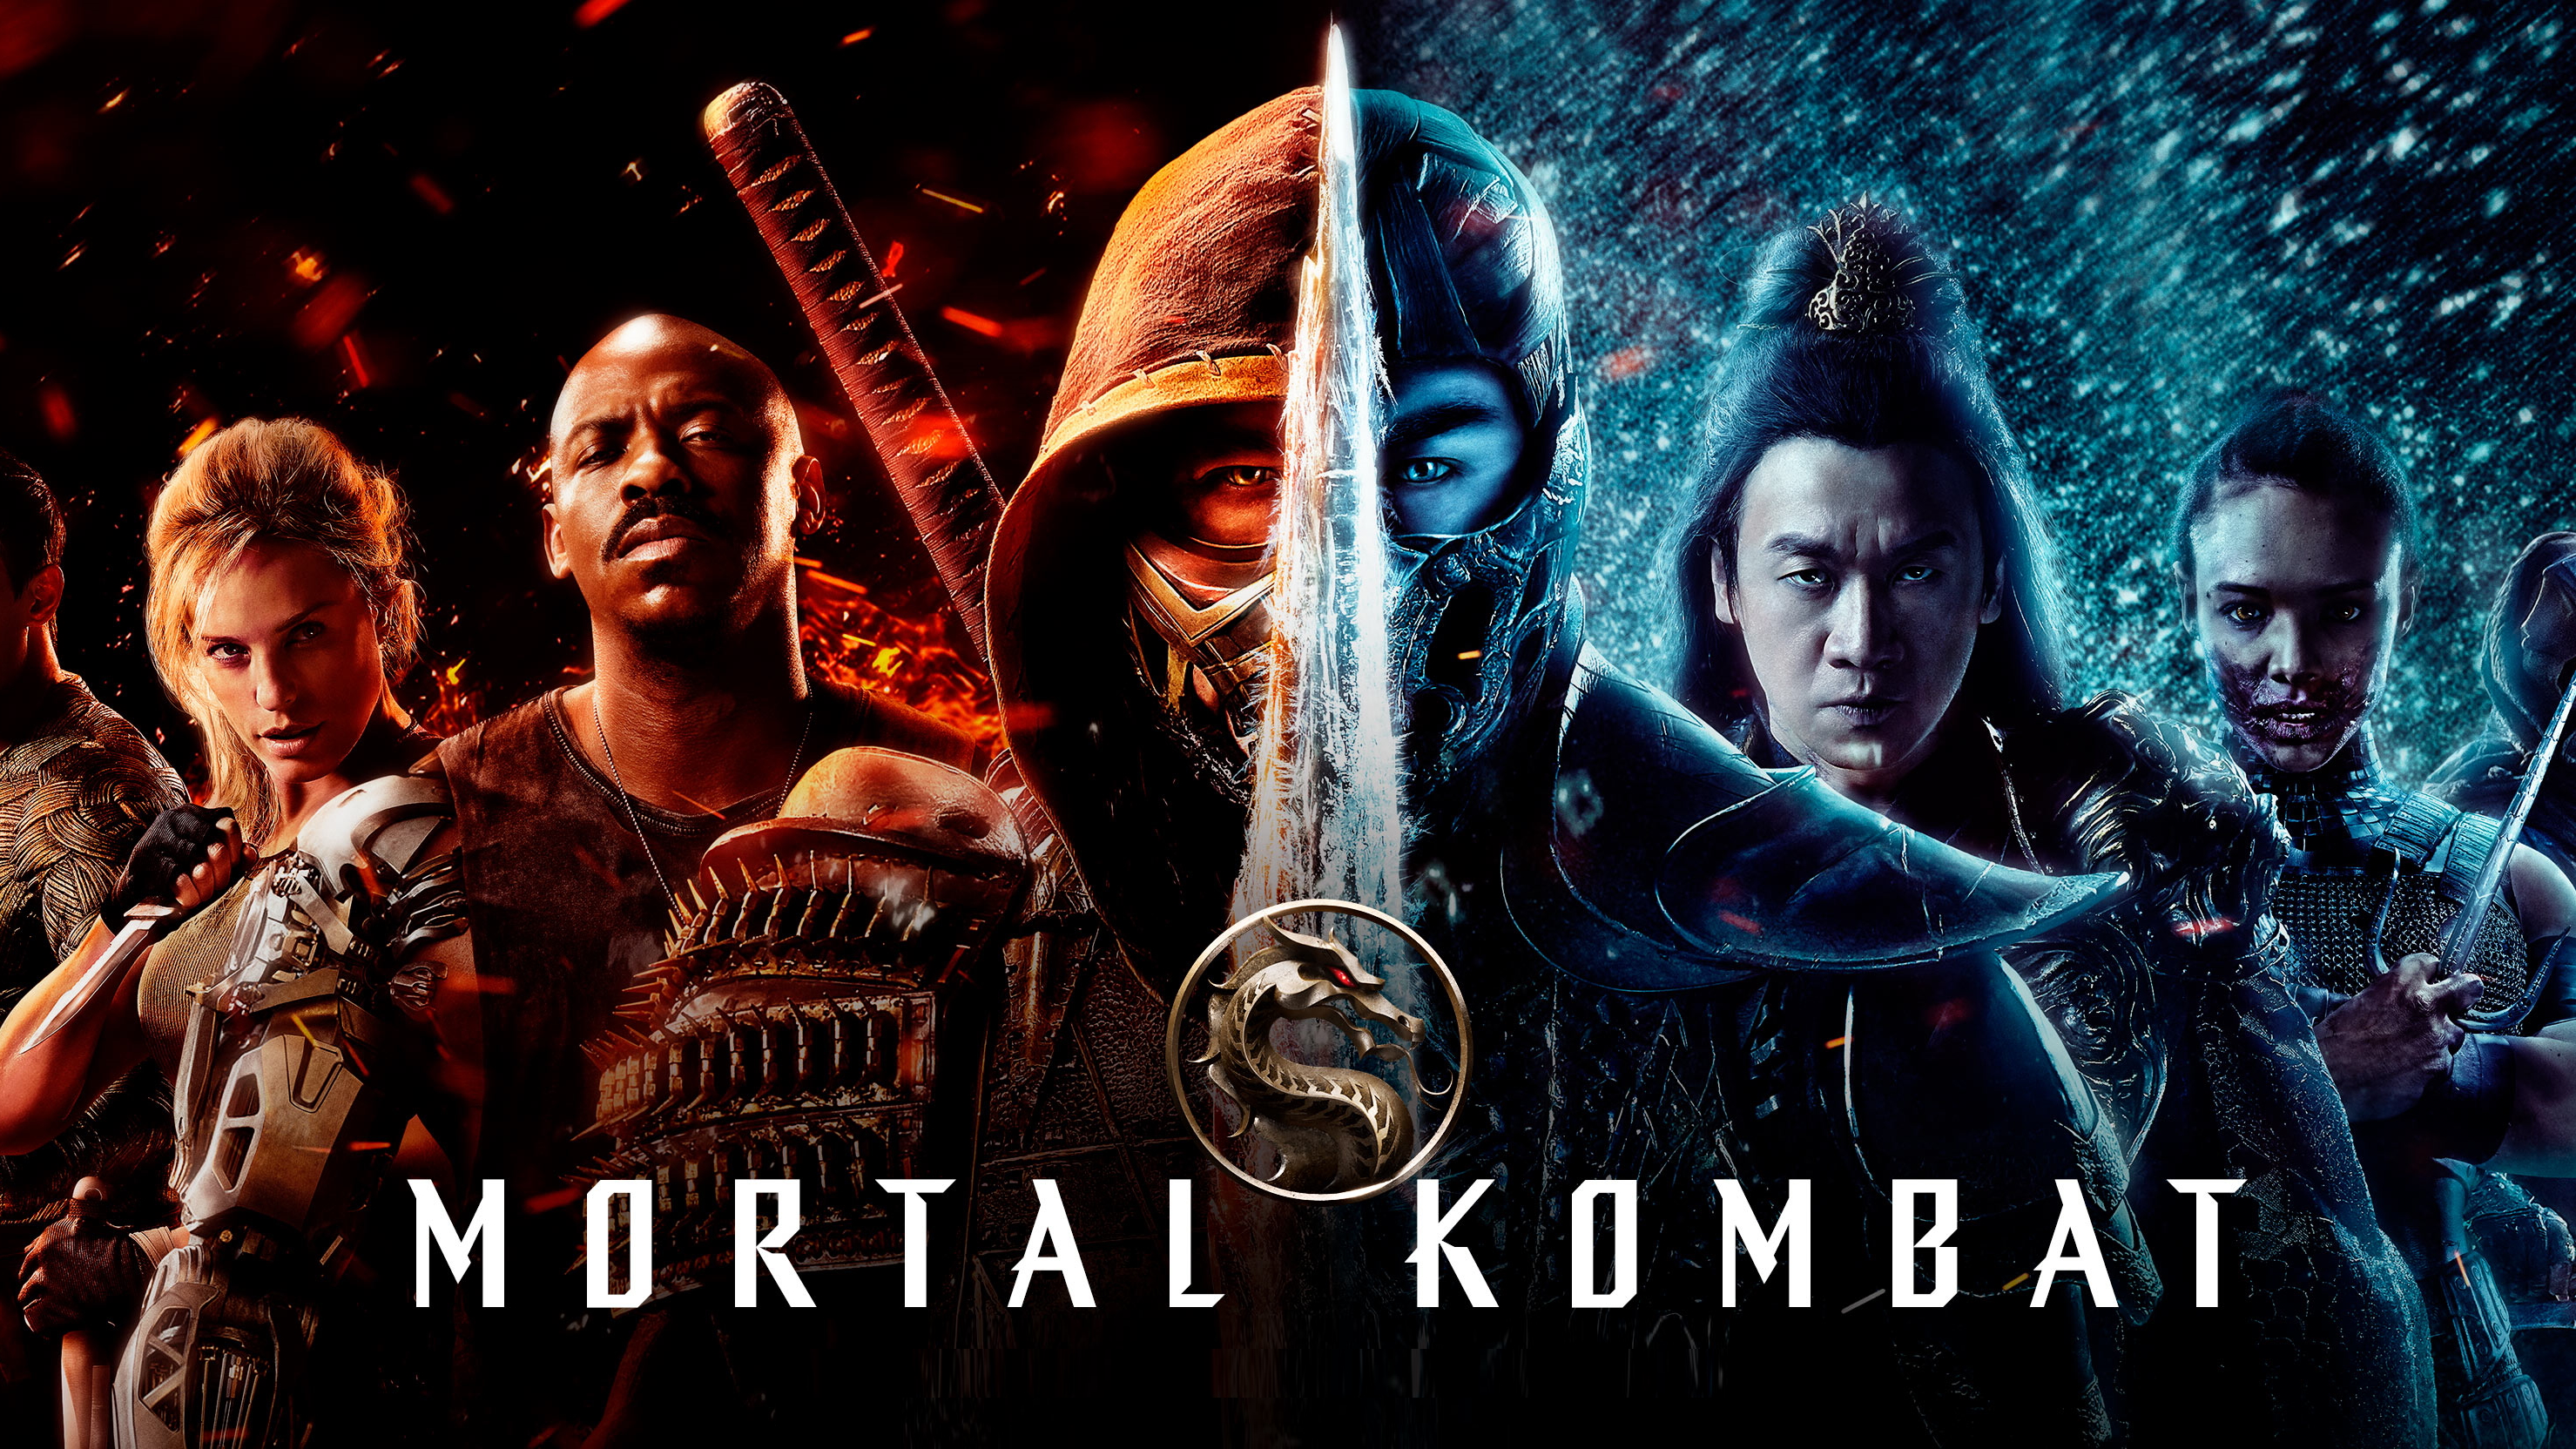 Mortal Kombat movie producer's dream is to do a Marvel with the